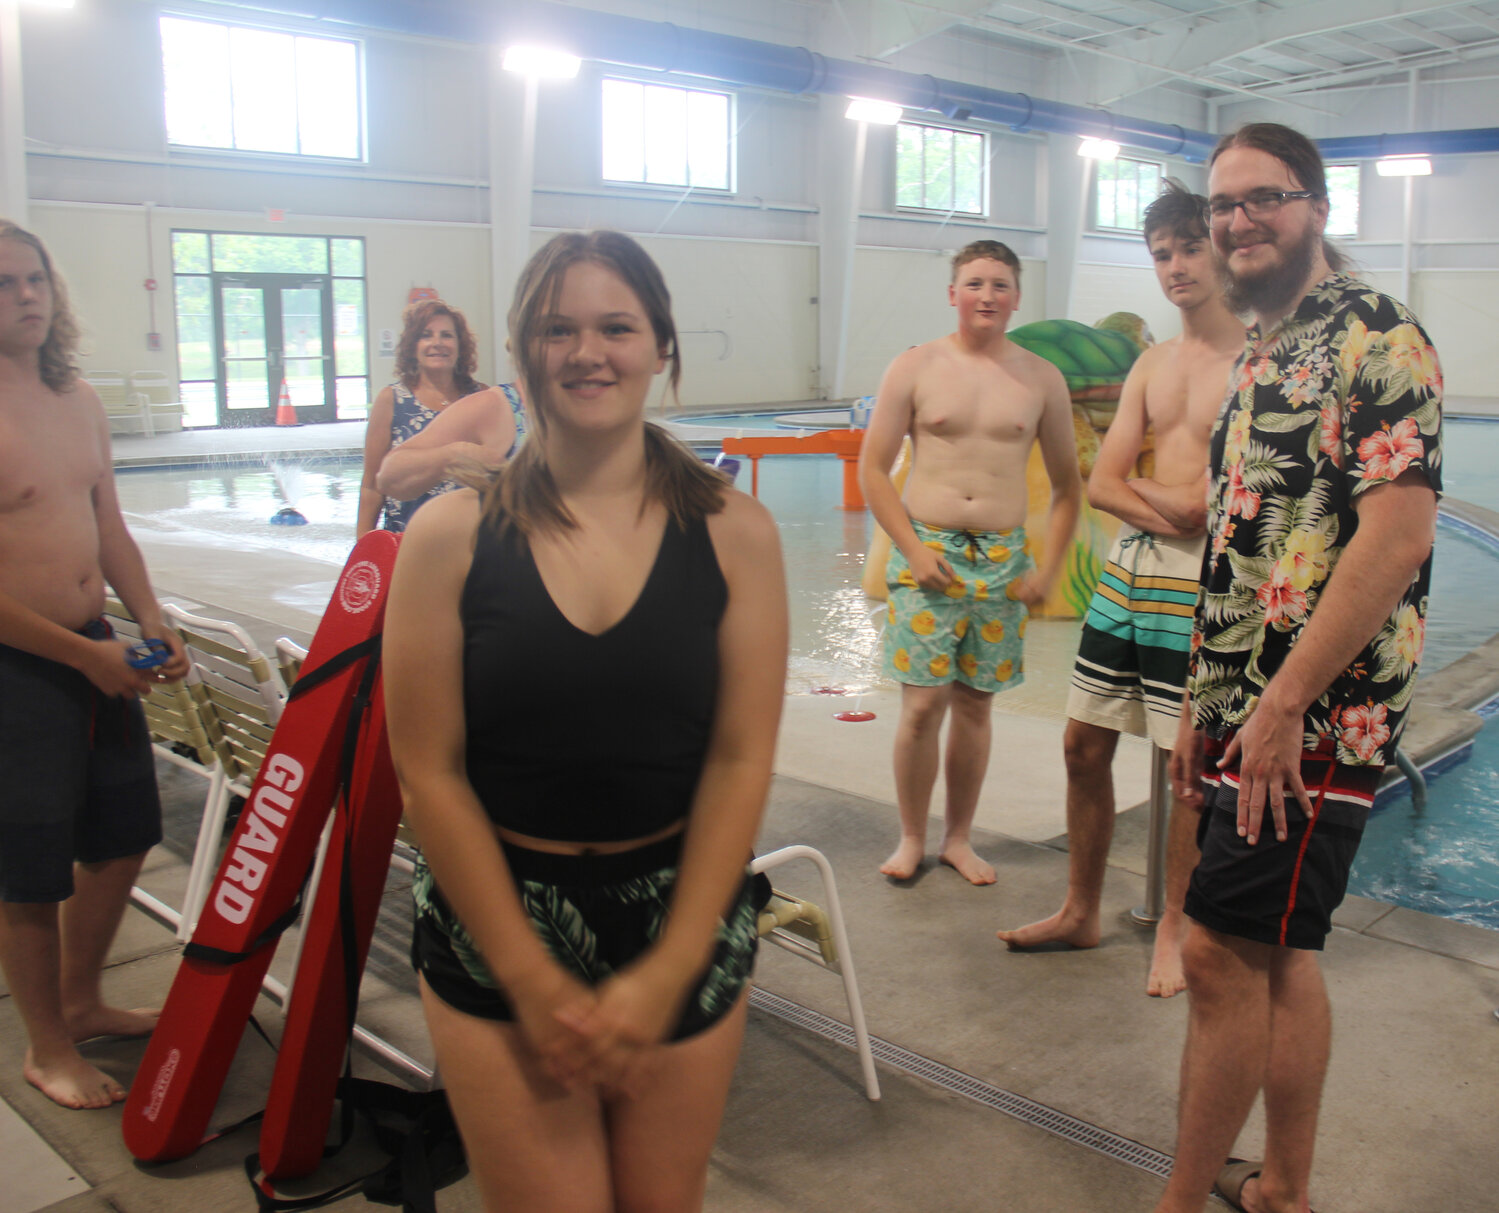 Lifeguard instructor Cole McBride, right, stands with his team of lifeguard candidates prior to the start of their May 19 training at the Warrenton Aquatic Center.